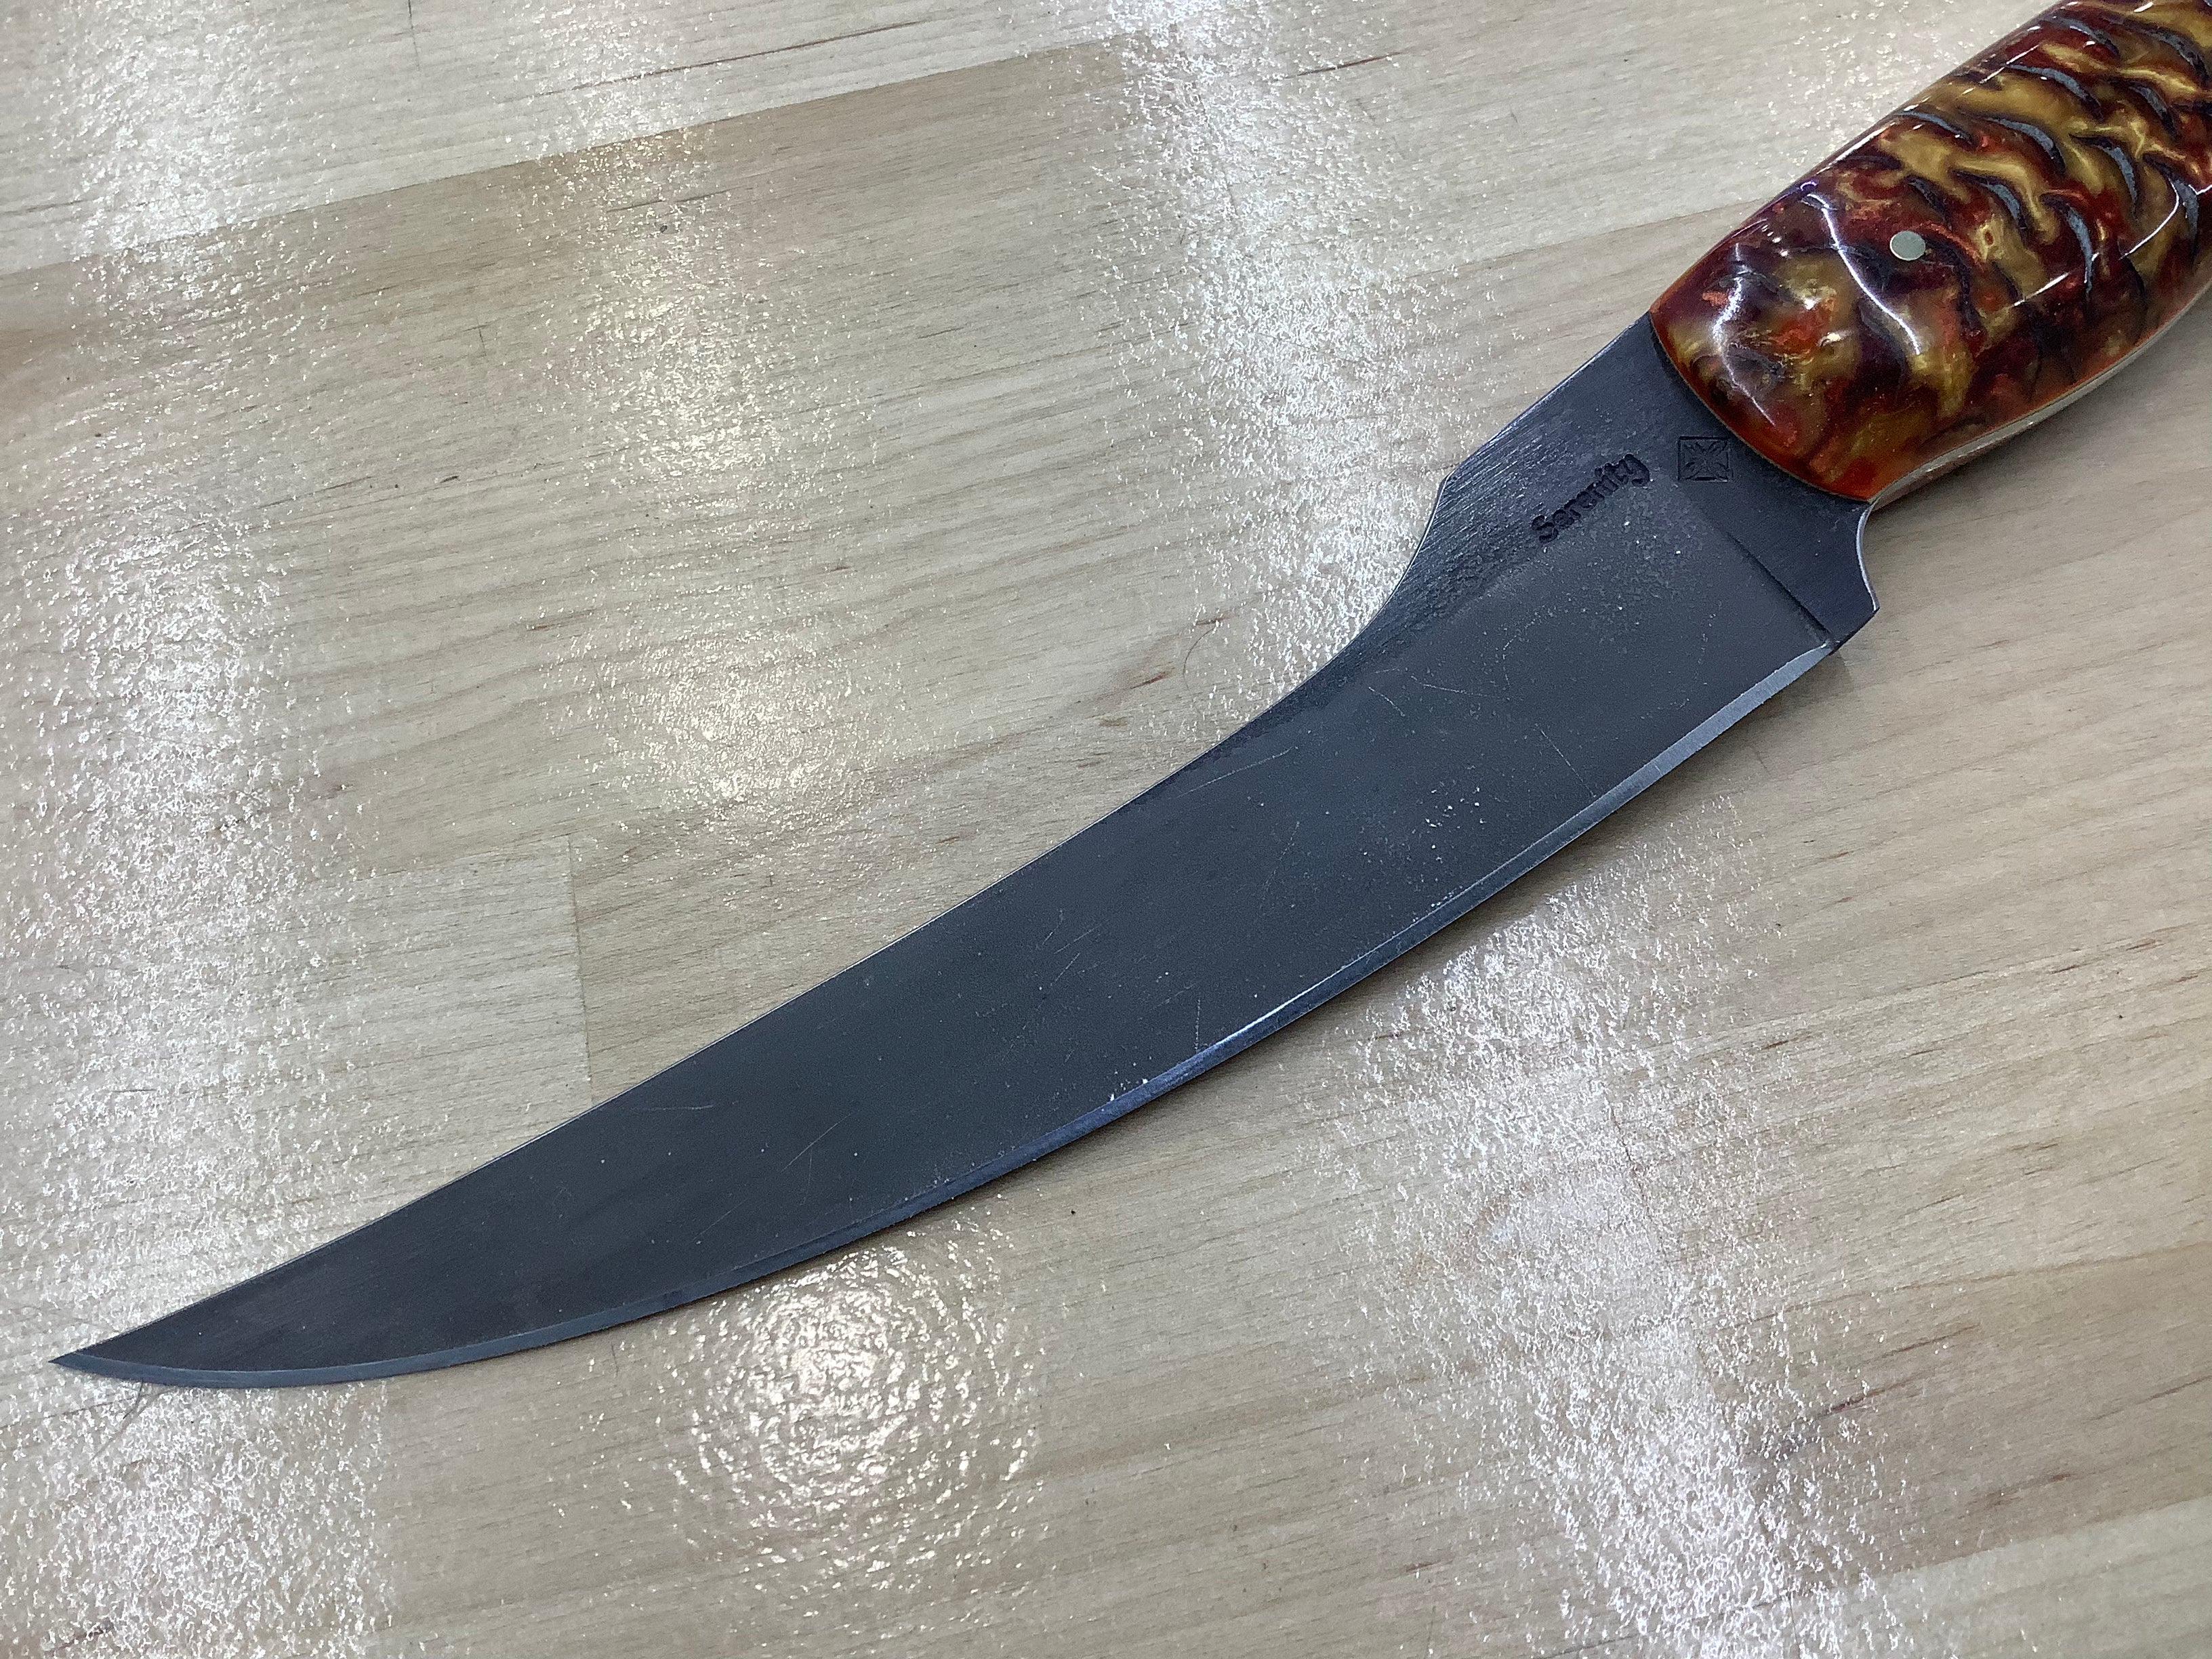 Firey Boning knife in CPM154 with Acid Washed Blade